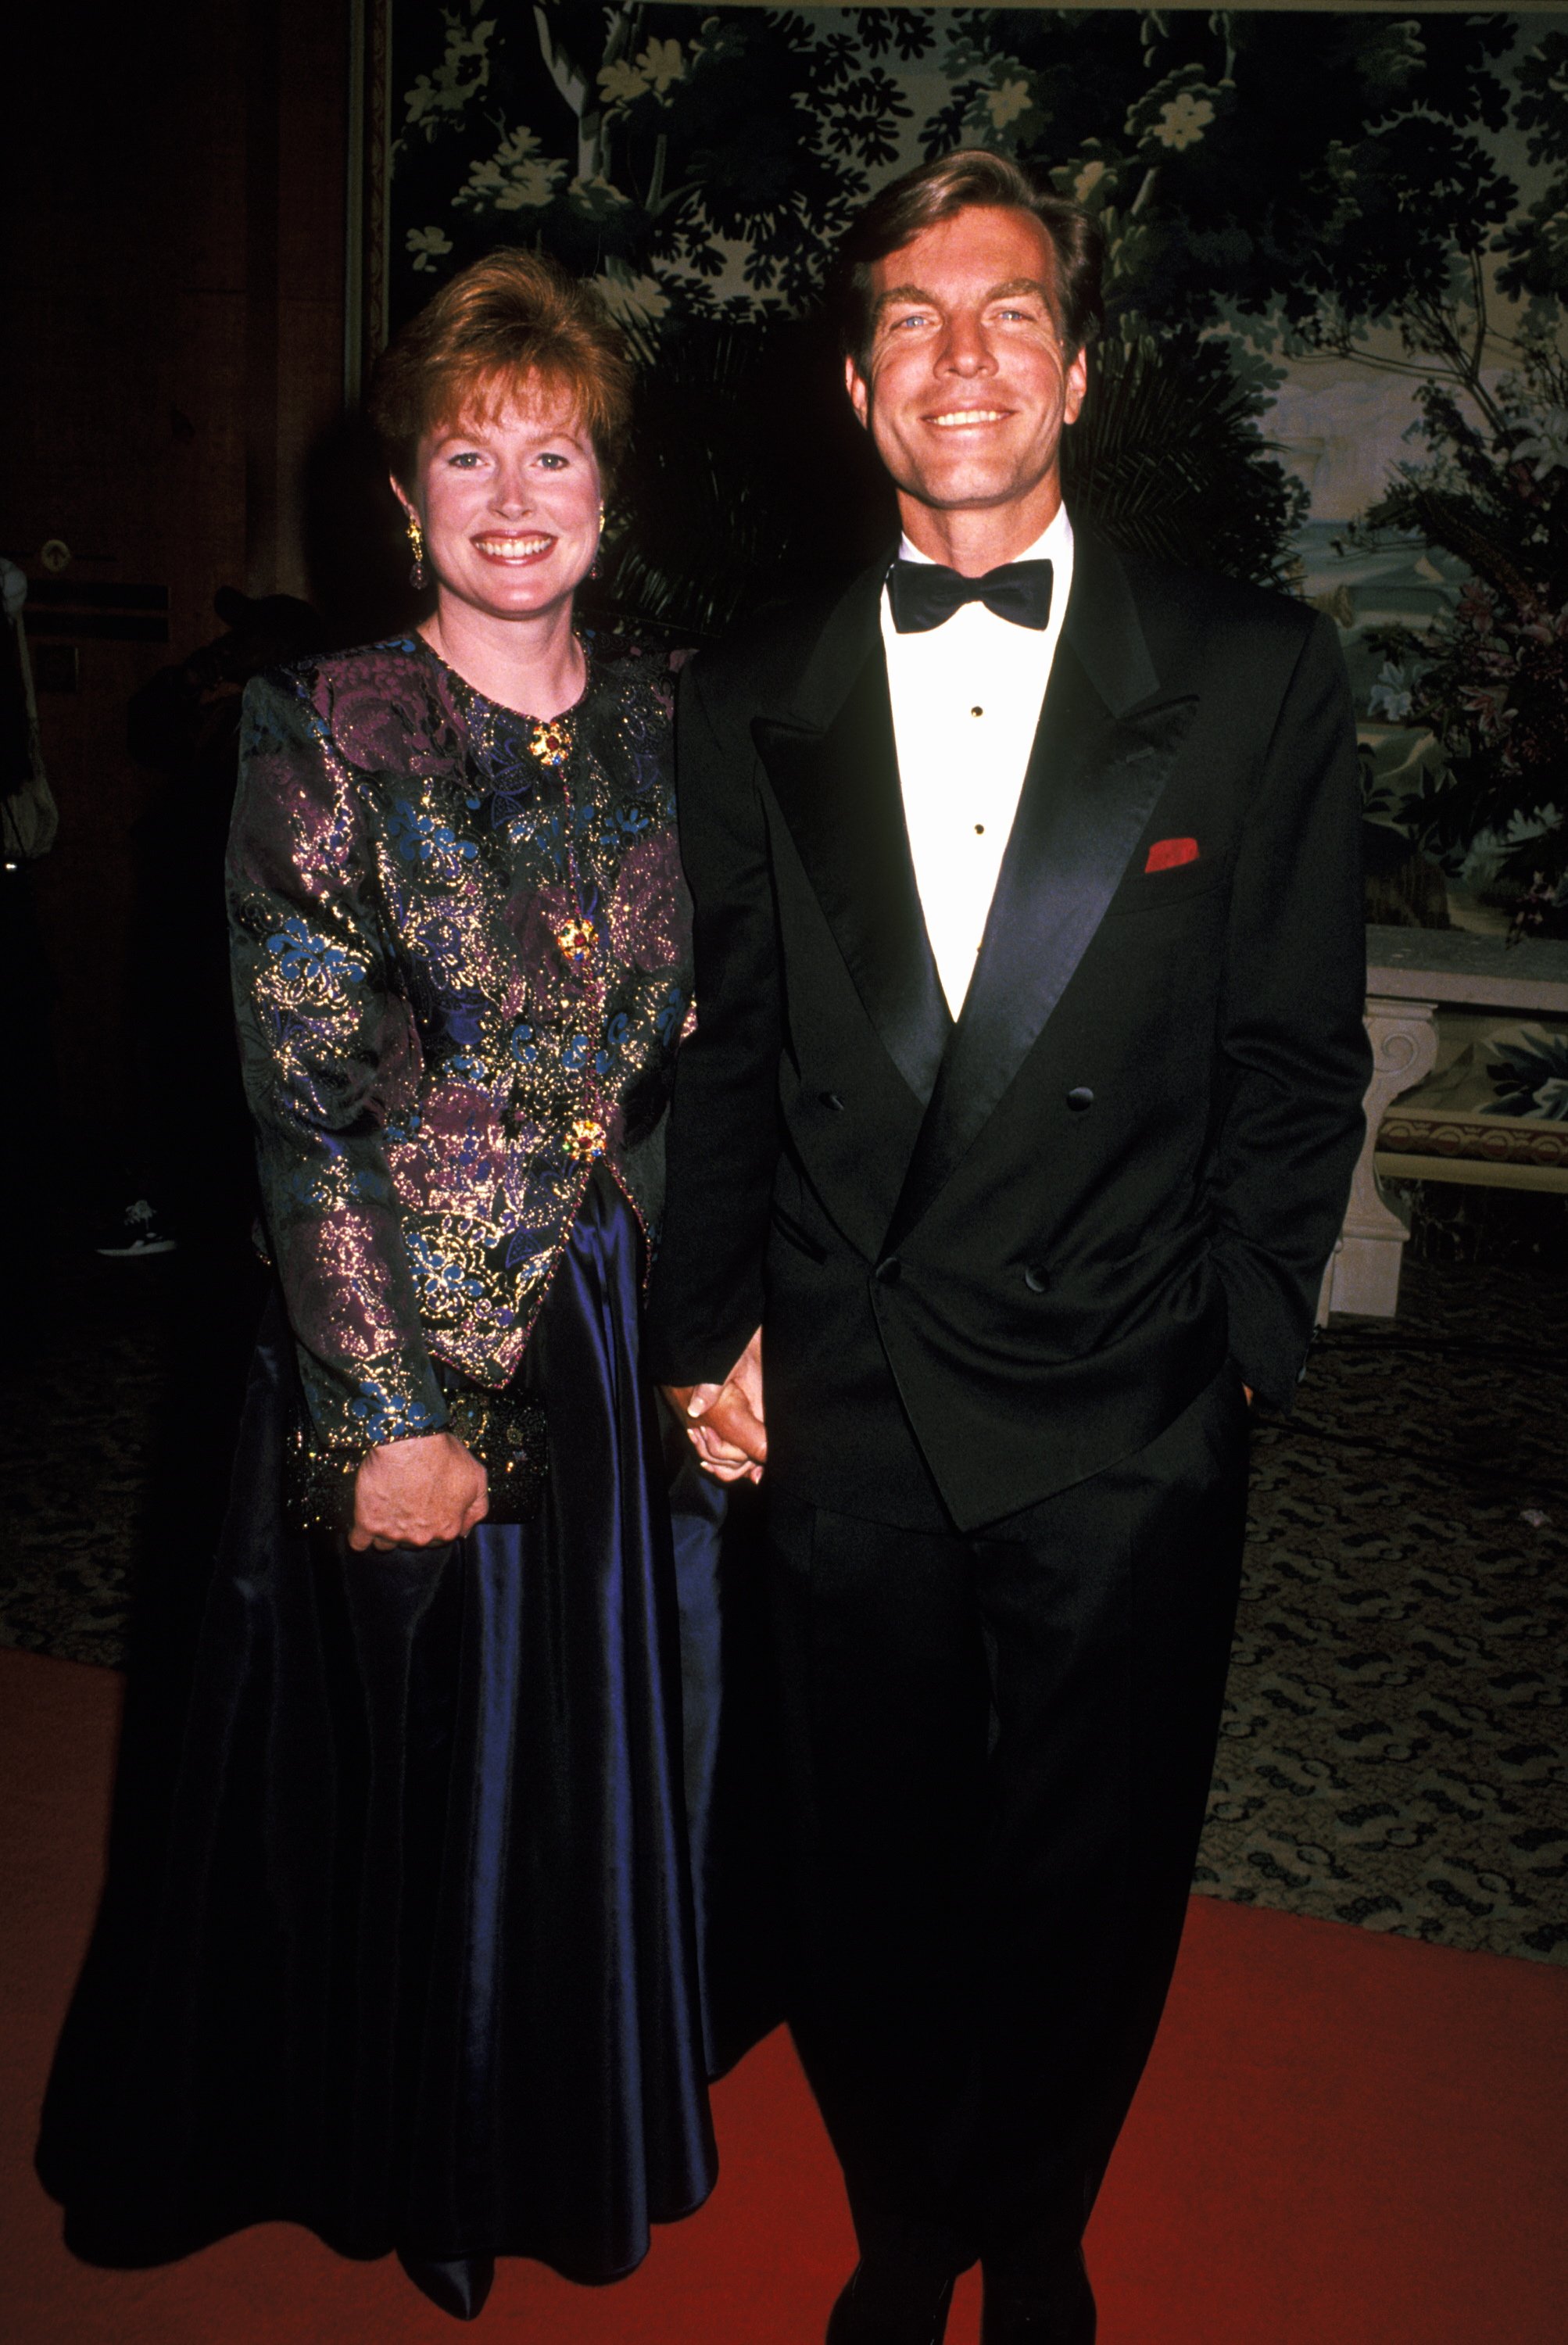 Peter Bergman and Mariellen at the 19th Annual Daytime Emmy Awards on June 23, 1992 | Source: Getty Images